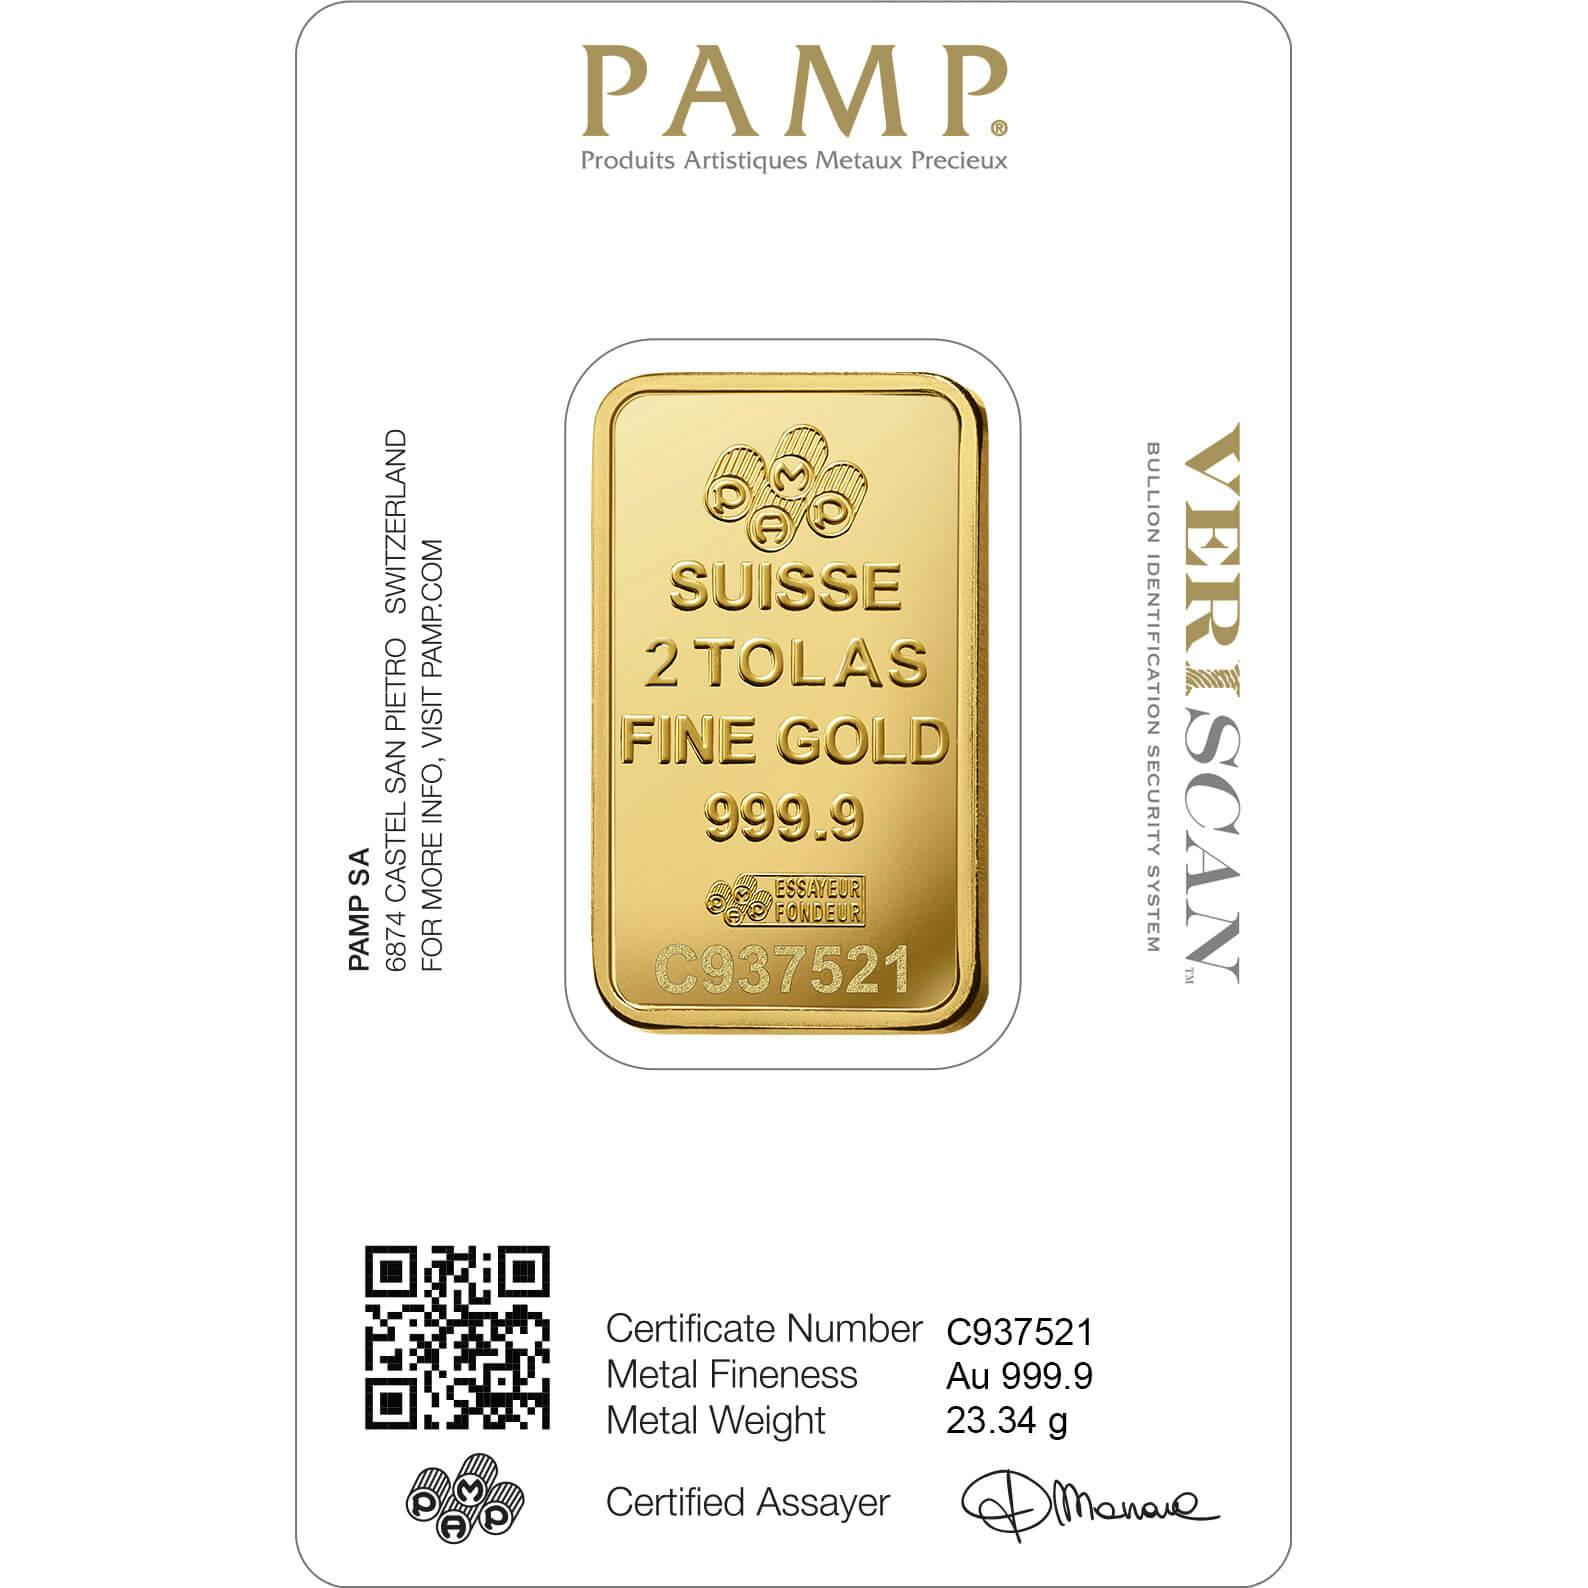 Invest in 2 tolas Fine Gold Lady Fortuna - PAMP Swiss - Back Veriscan